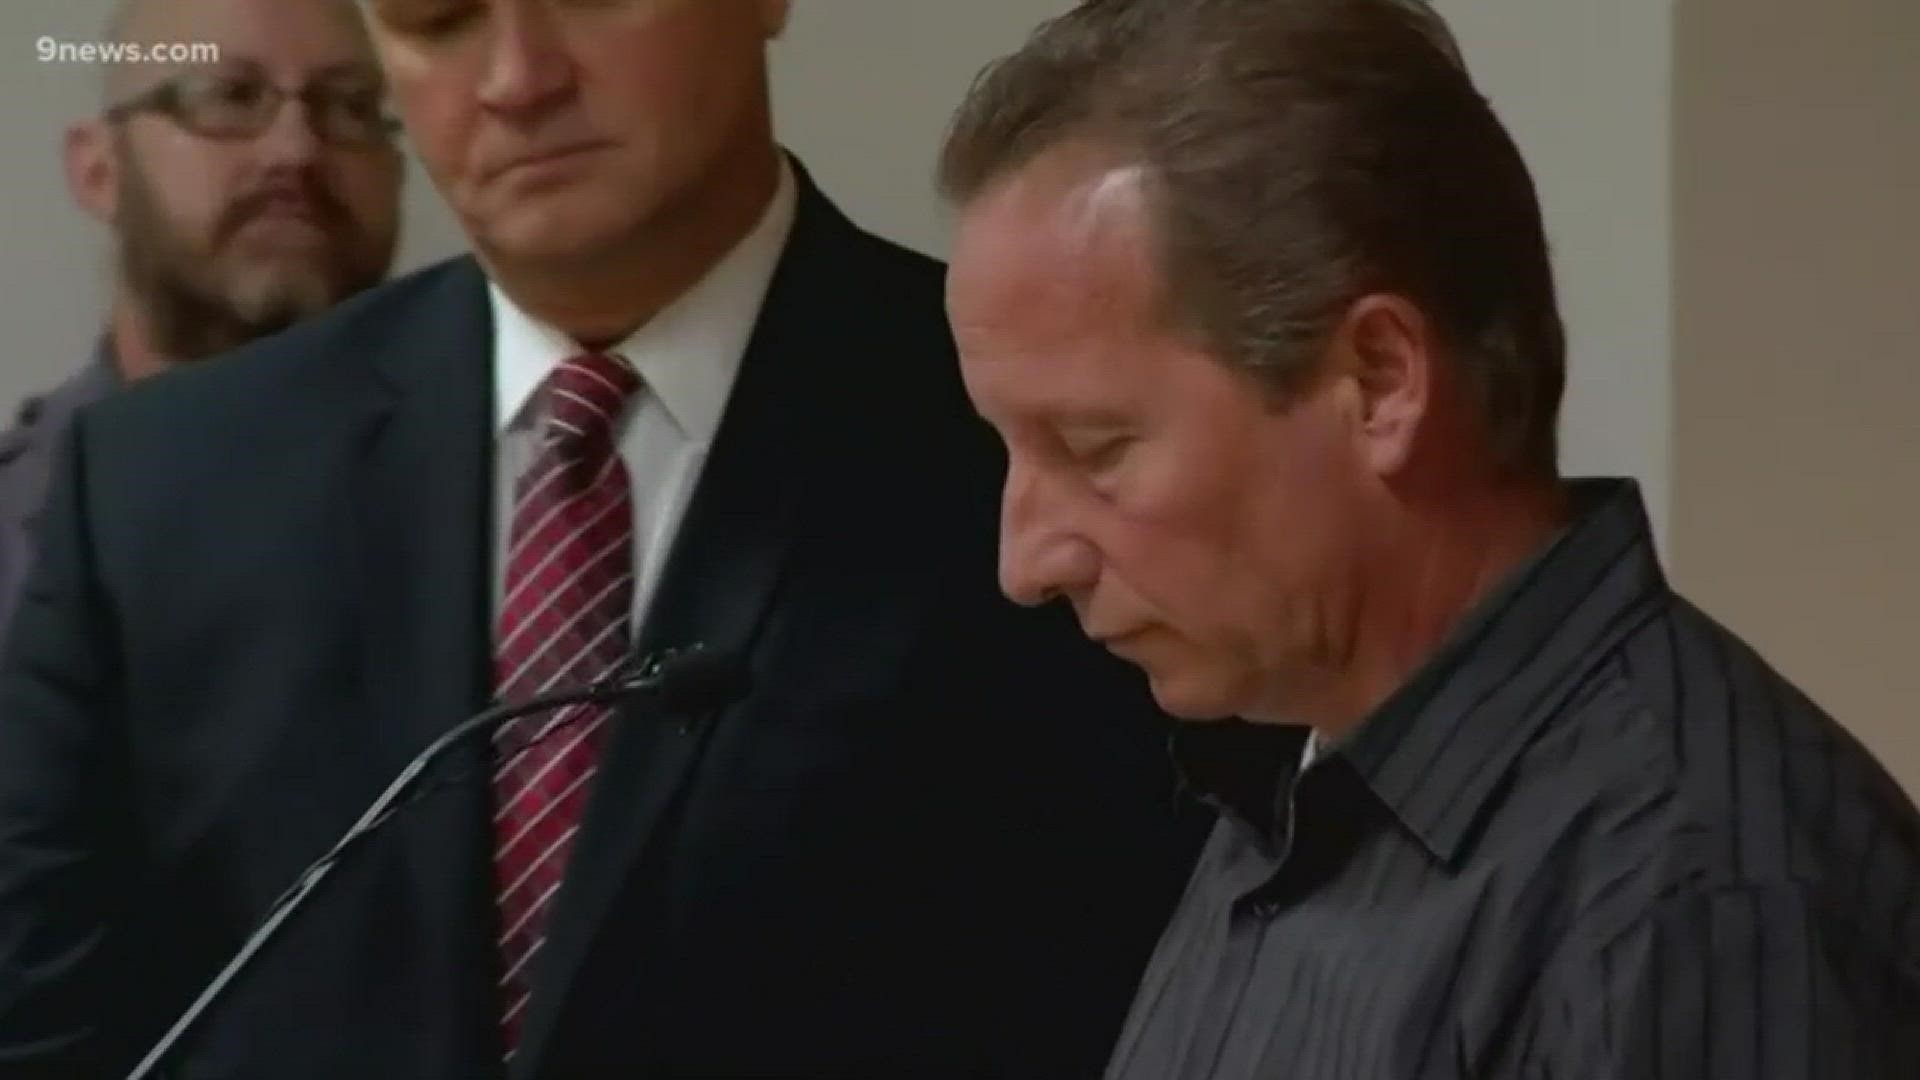 During a sentencing hearing for Chris Watts, Shanann's father Frank Rzucek gave a victim impact statement in which he called his son-in-law a "heartless monster". Watts pleaded guilty to killing his pregnant wife Shanann and their two young daughters.